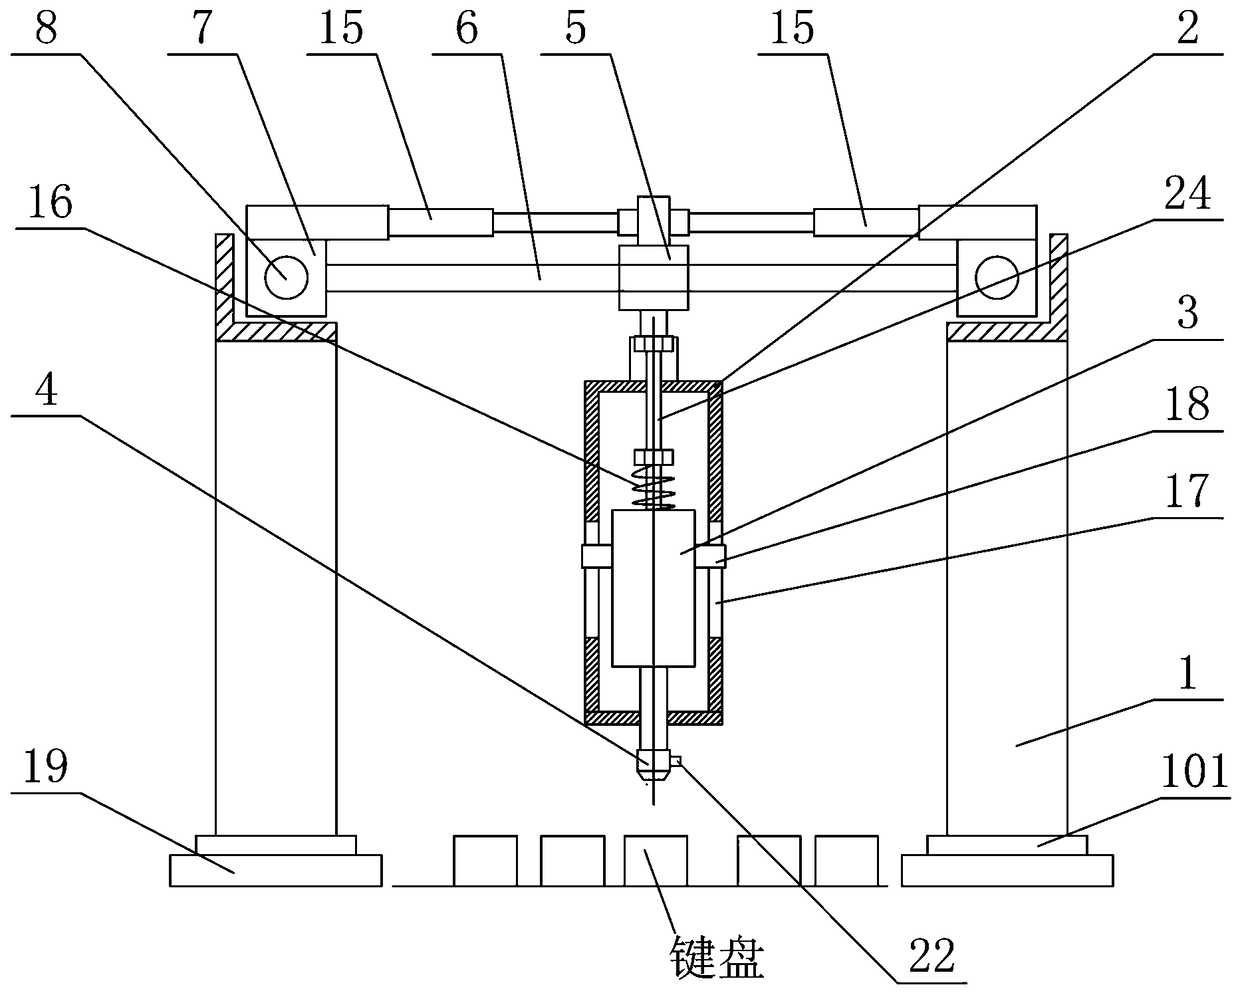 Keyboard detection device for testing radiated susceptibility of radiofrequency electromagnetic field of oiling machine